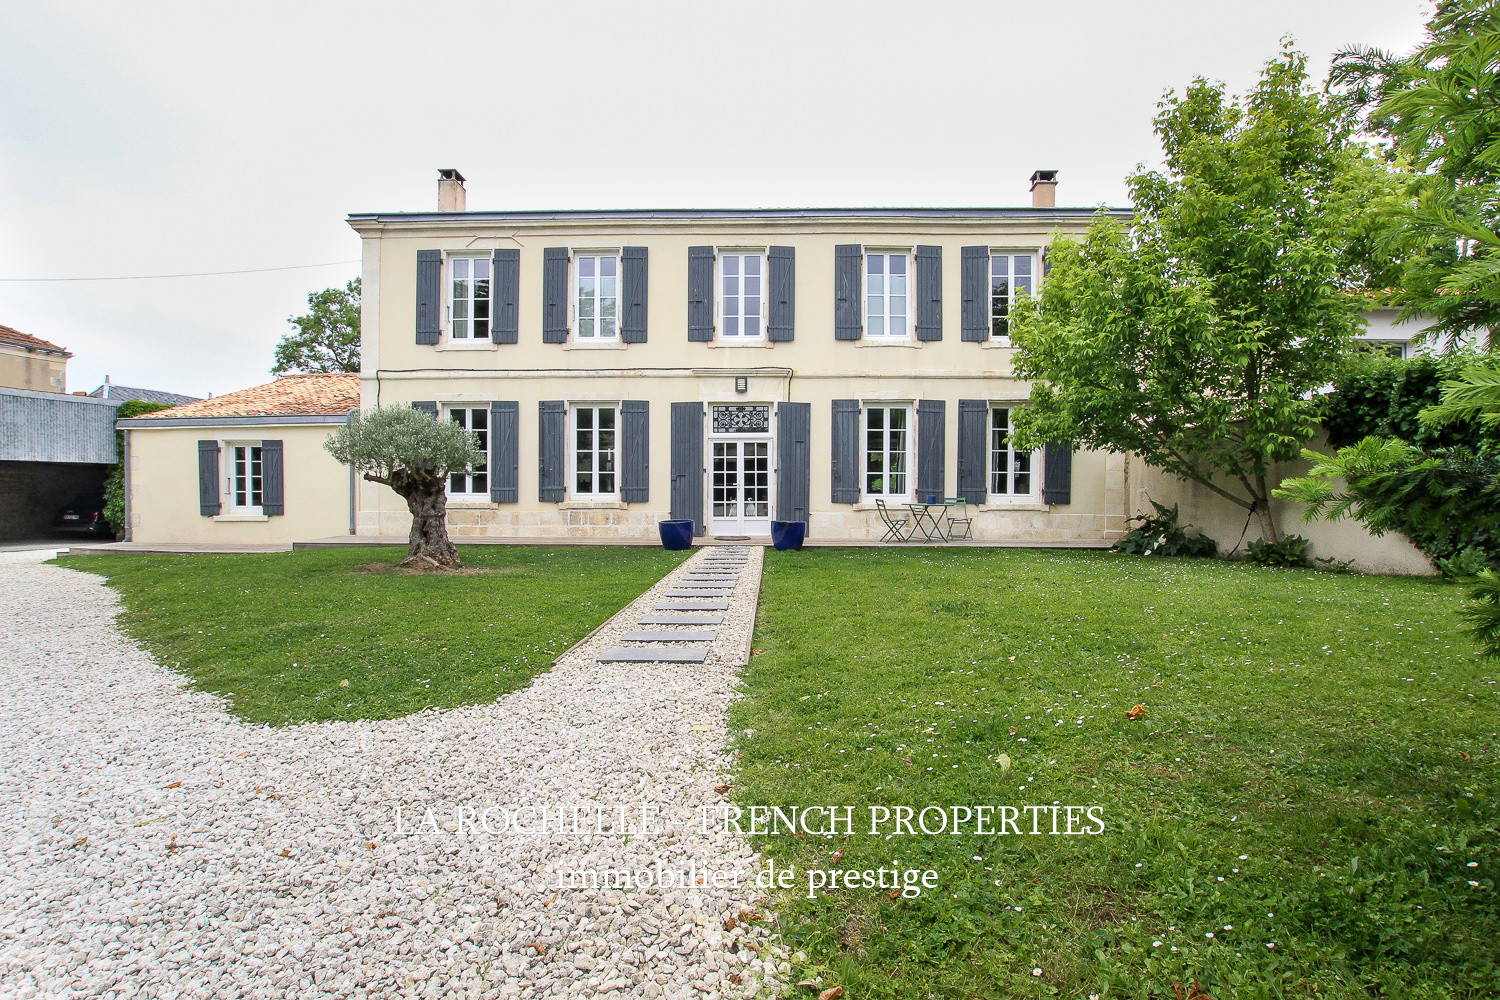 our selection of houses for sale in La Rochelle